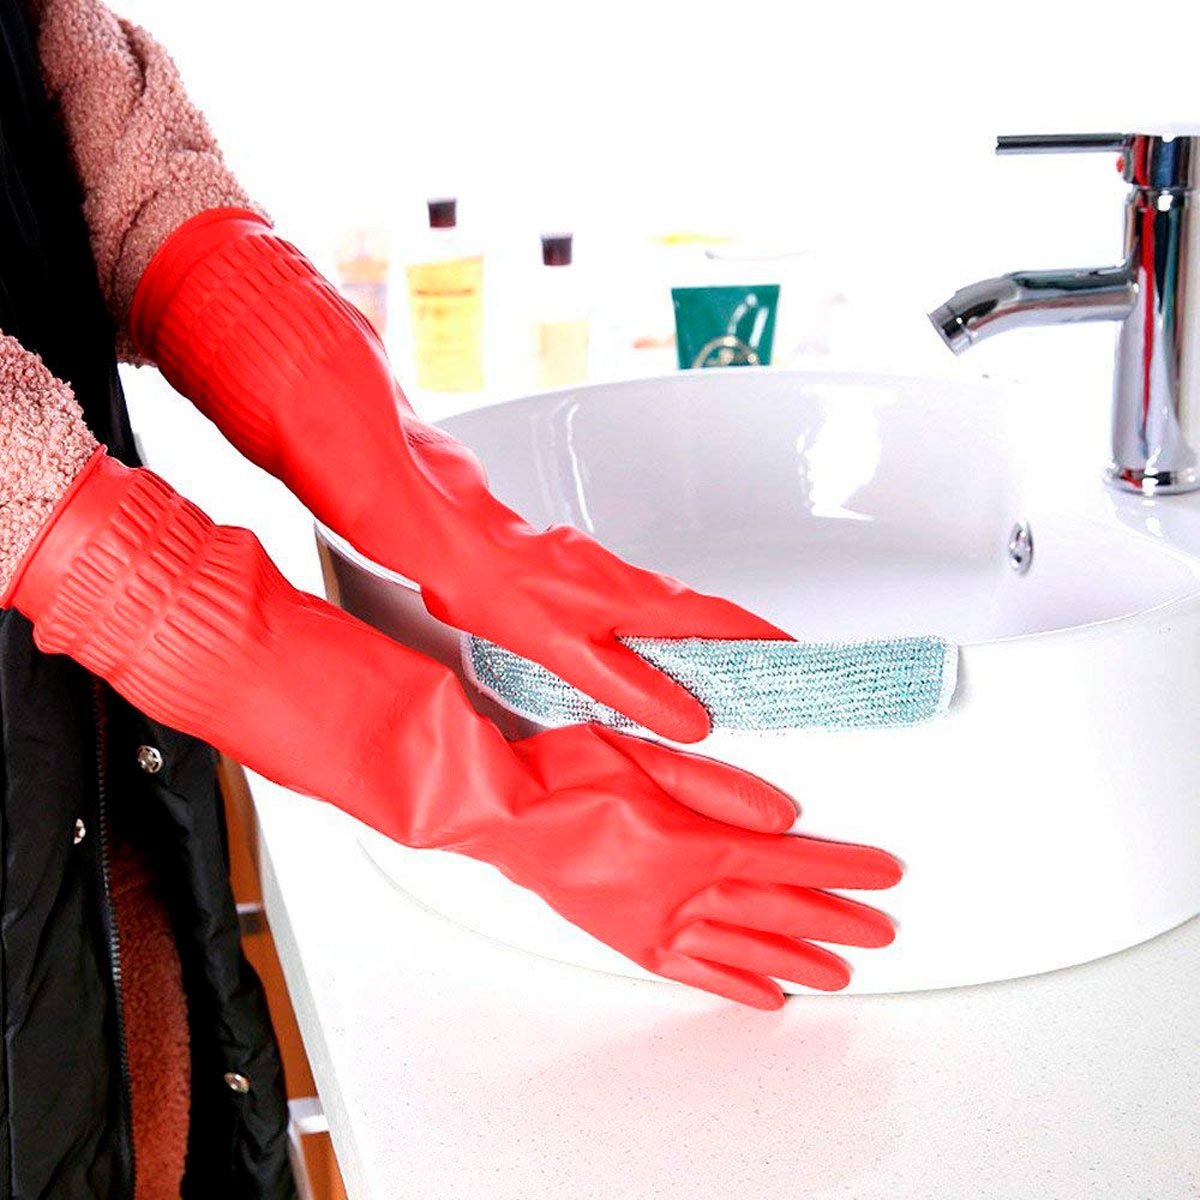 hand gloves for cleaning online